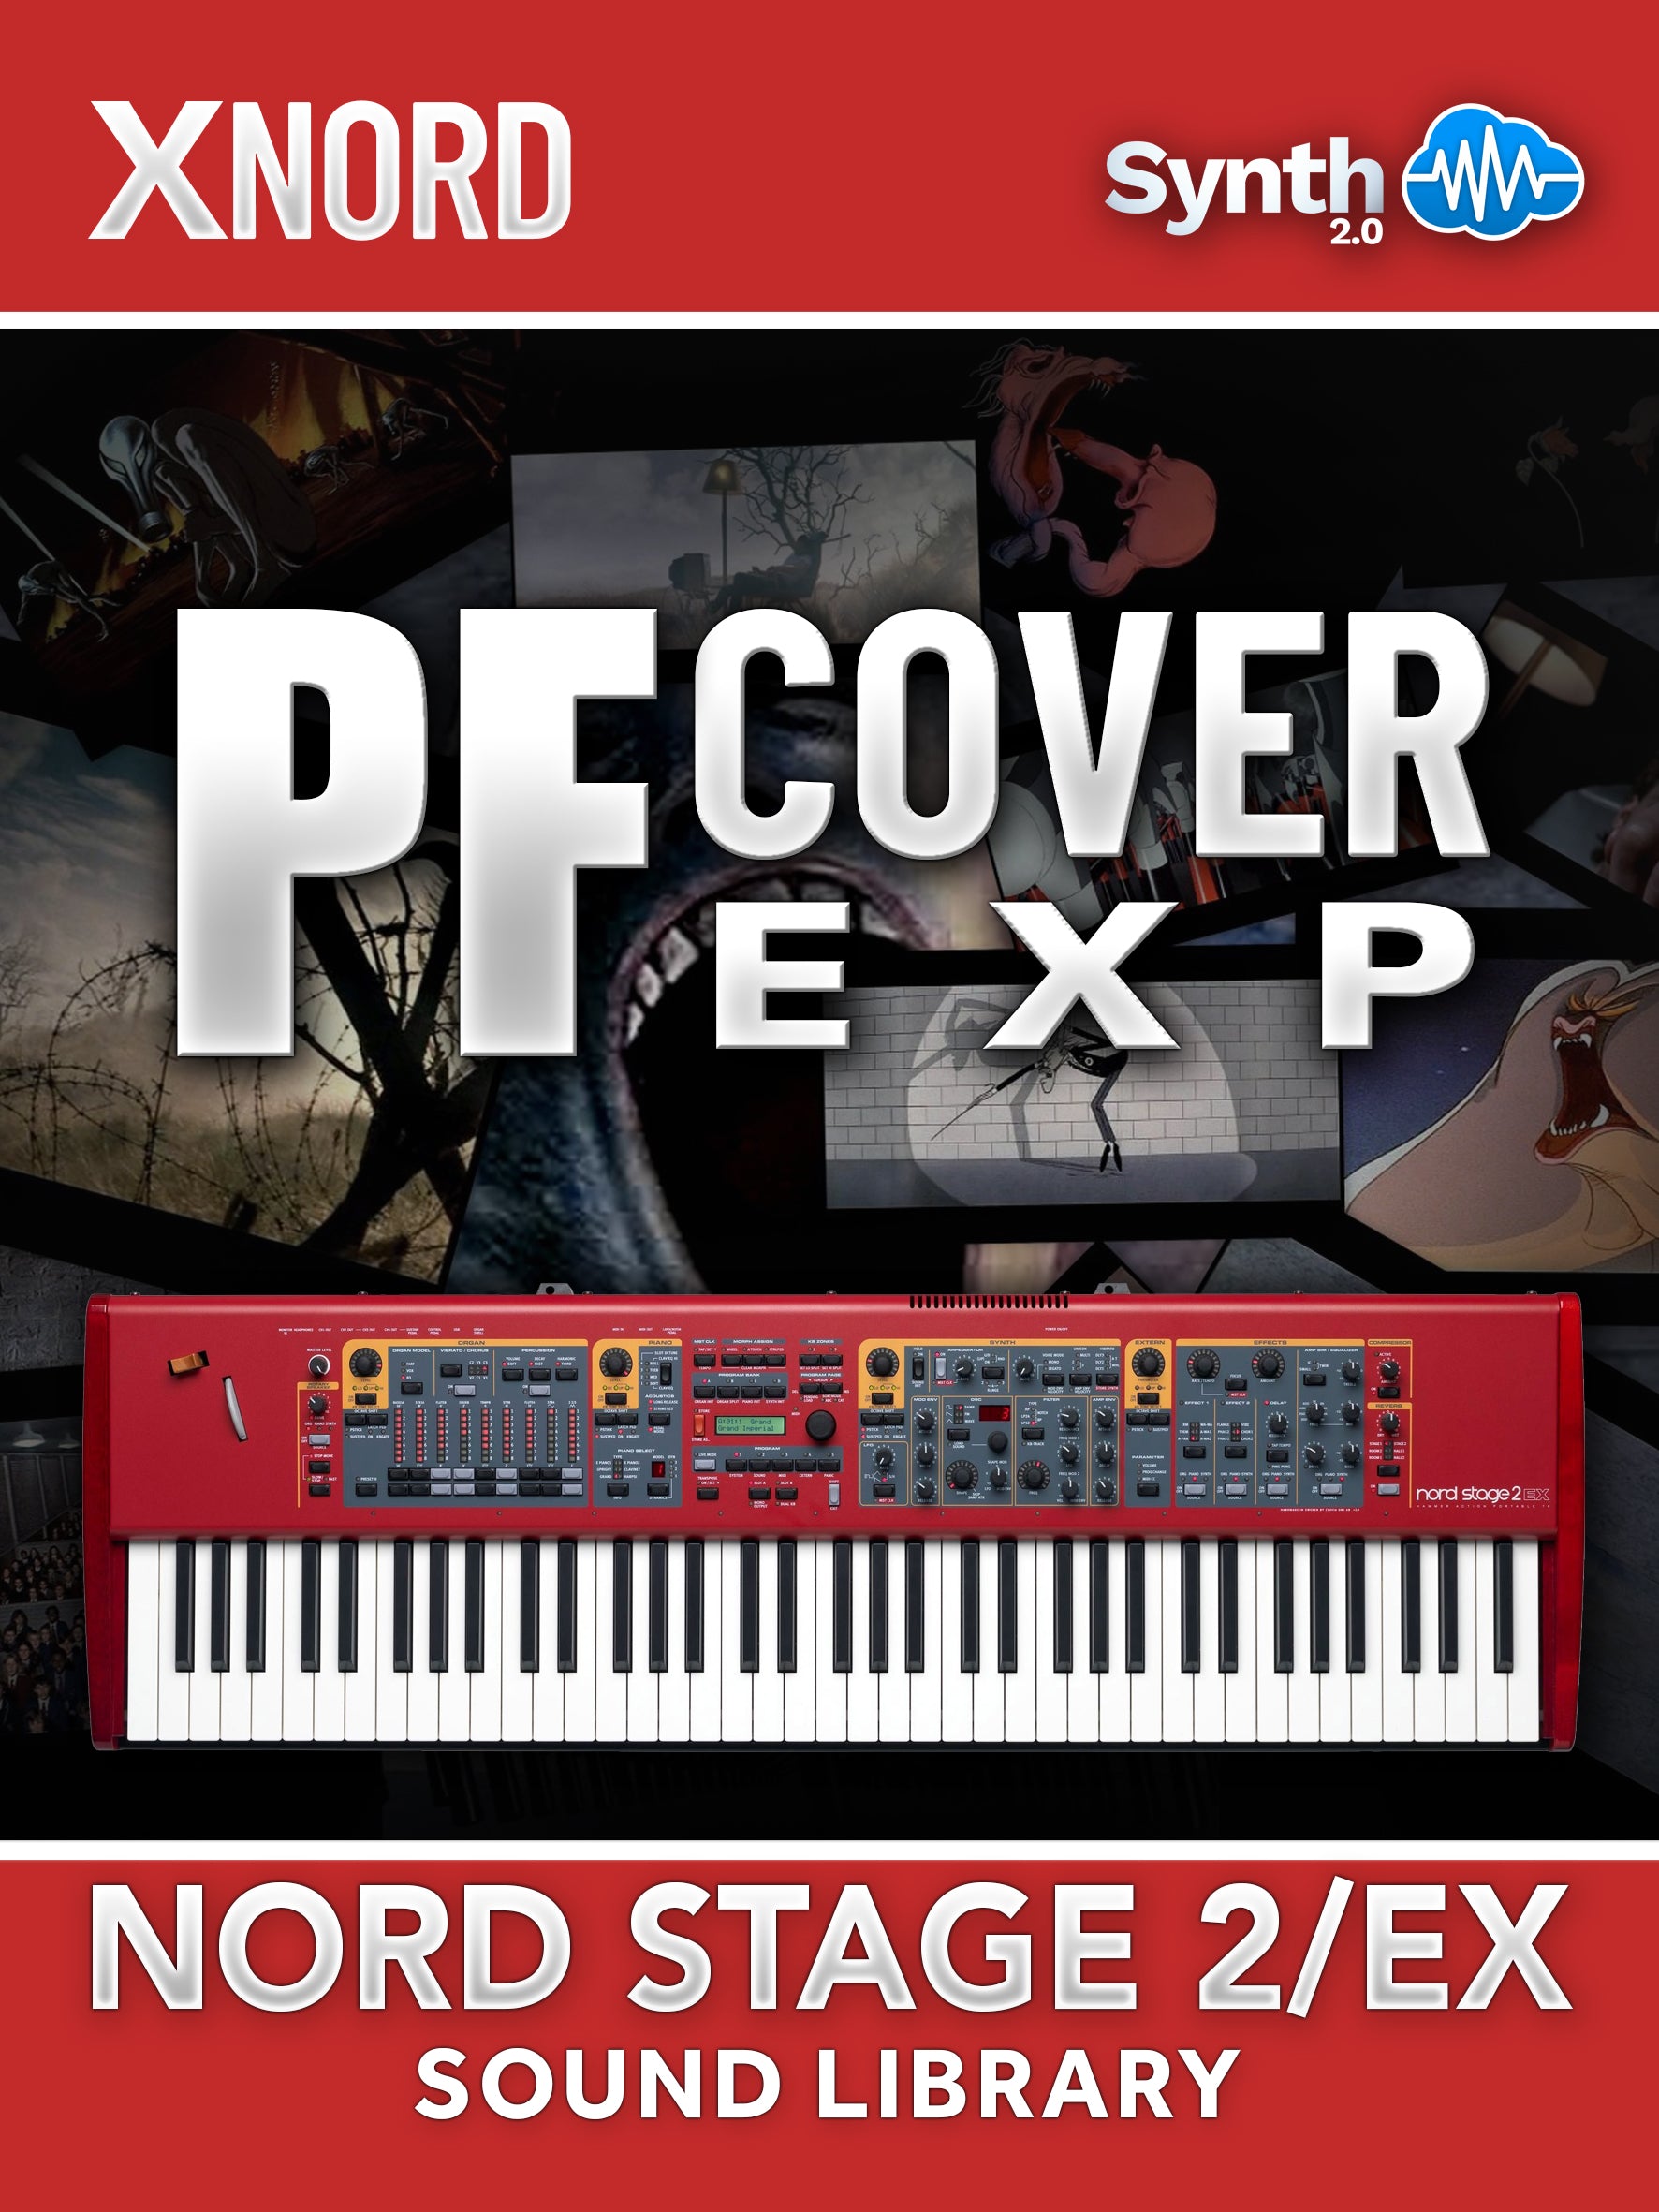 FPL005 - ( Bundle ) - PF Cover EXP + T9T9 Cover EXP - Nord Stage 2 / EX